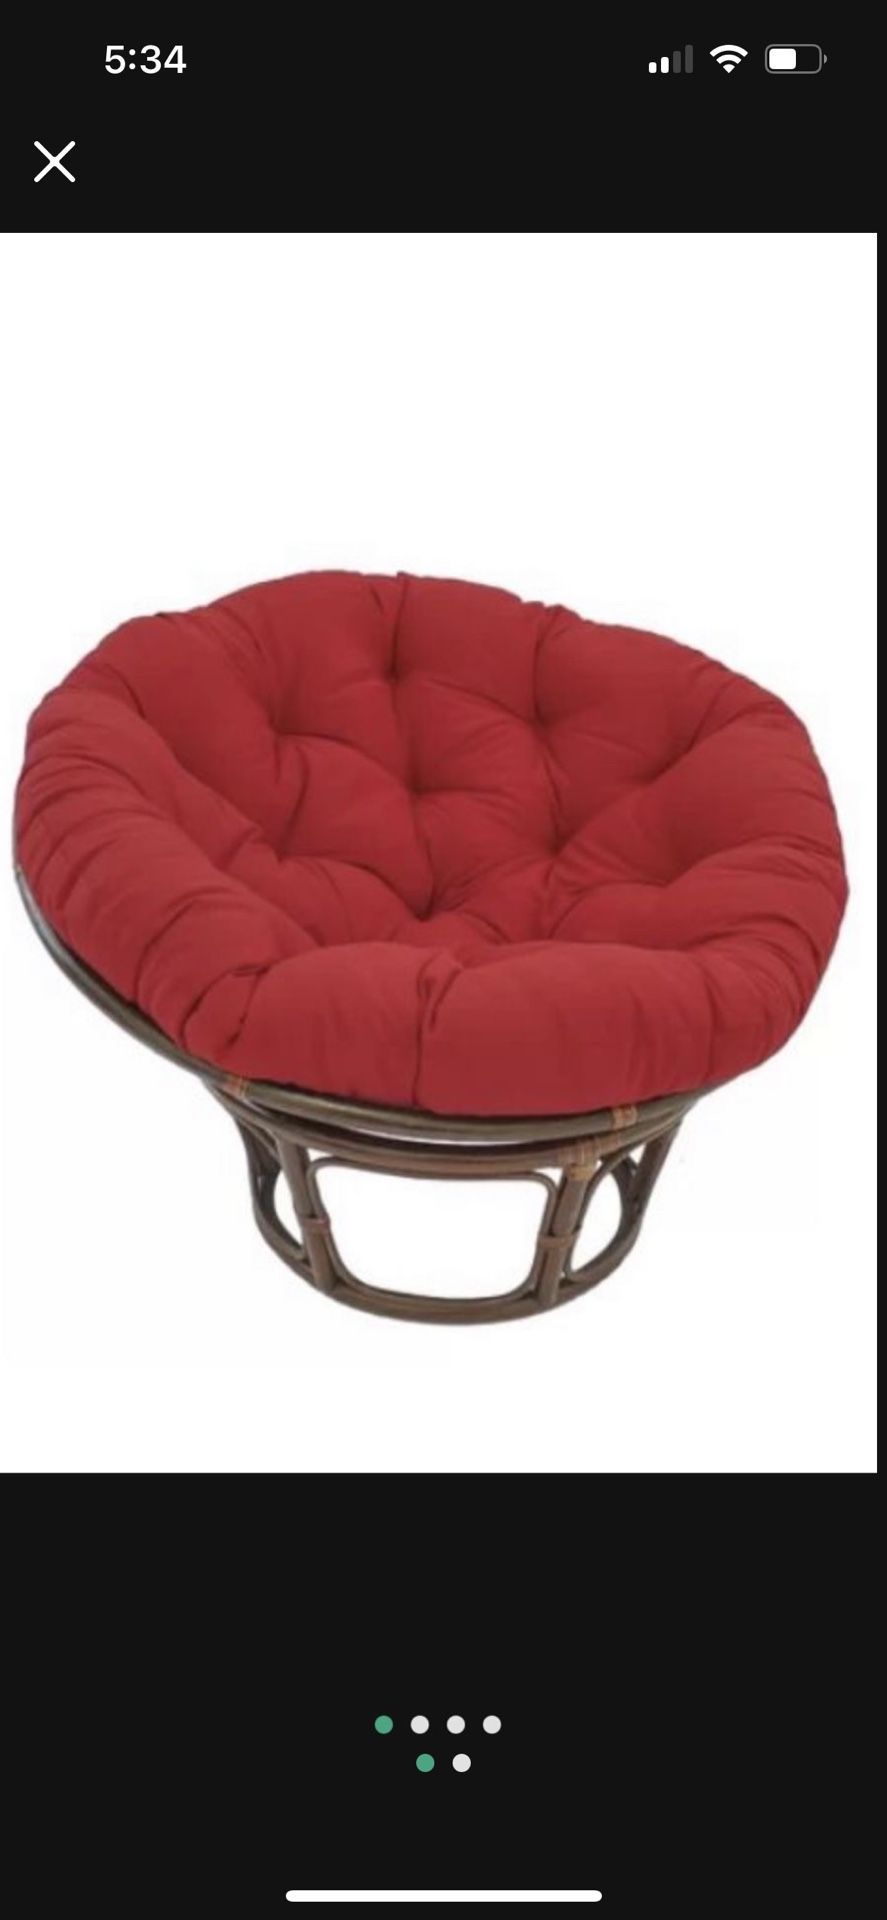 Pier One Brand Taupe Papasan 45” Chair With Red Cushion 